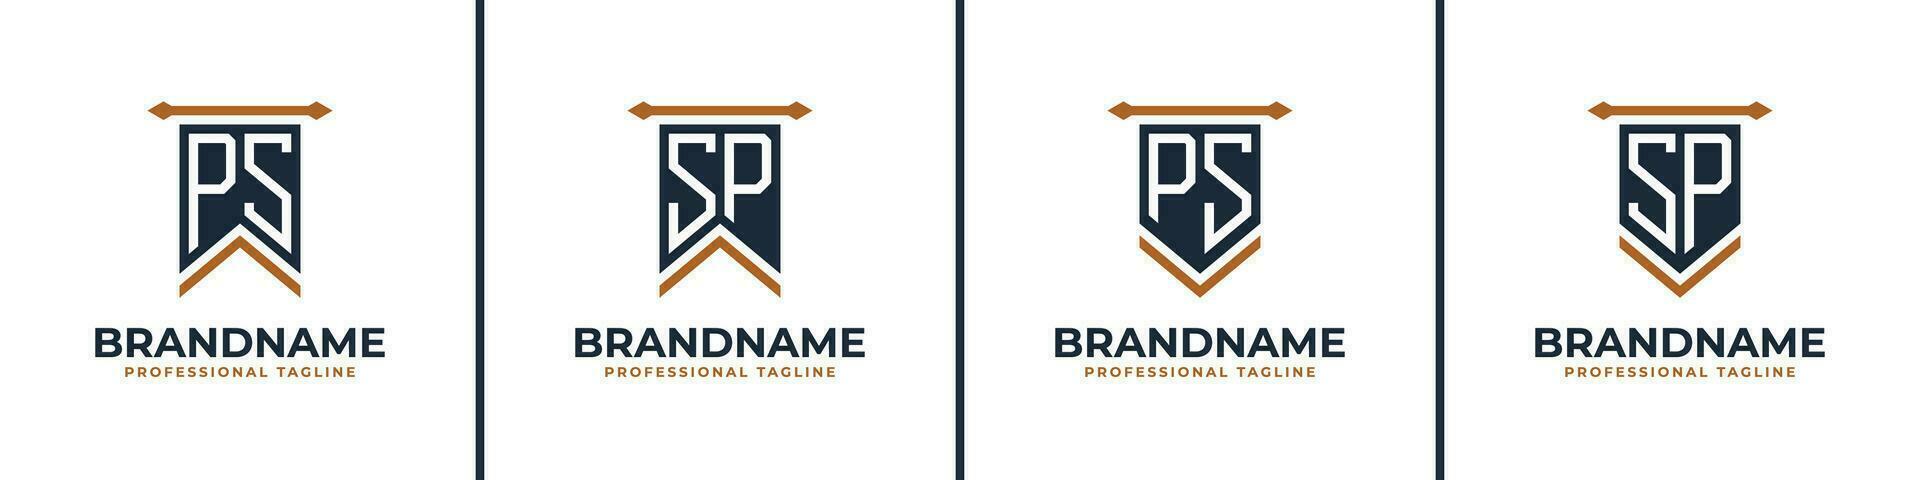 Letter PS and SP Pennant Flag Logo Set, Represent Victory. Suitable for any business with PS or SP initials. vector